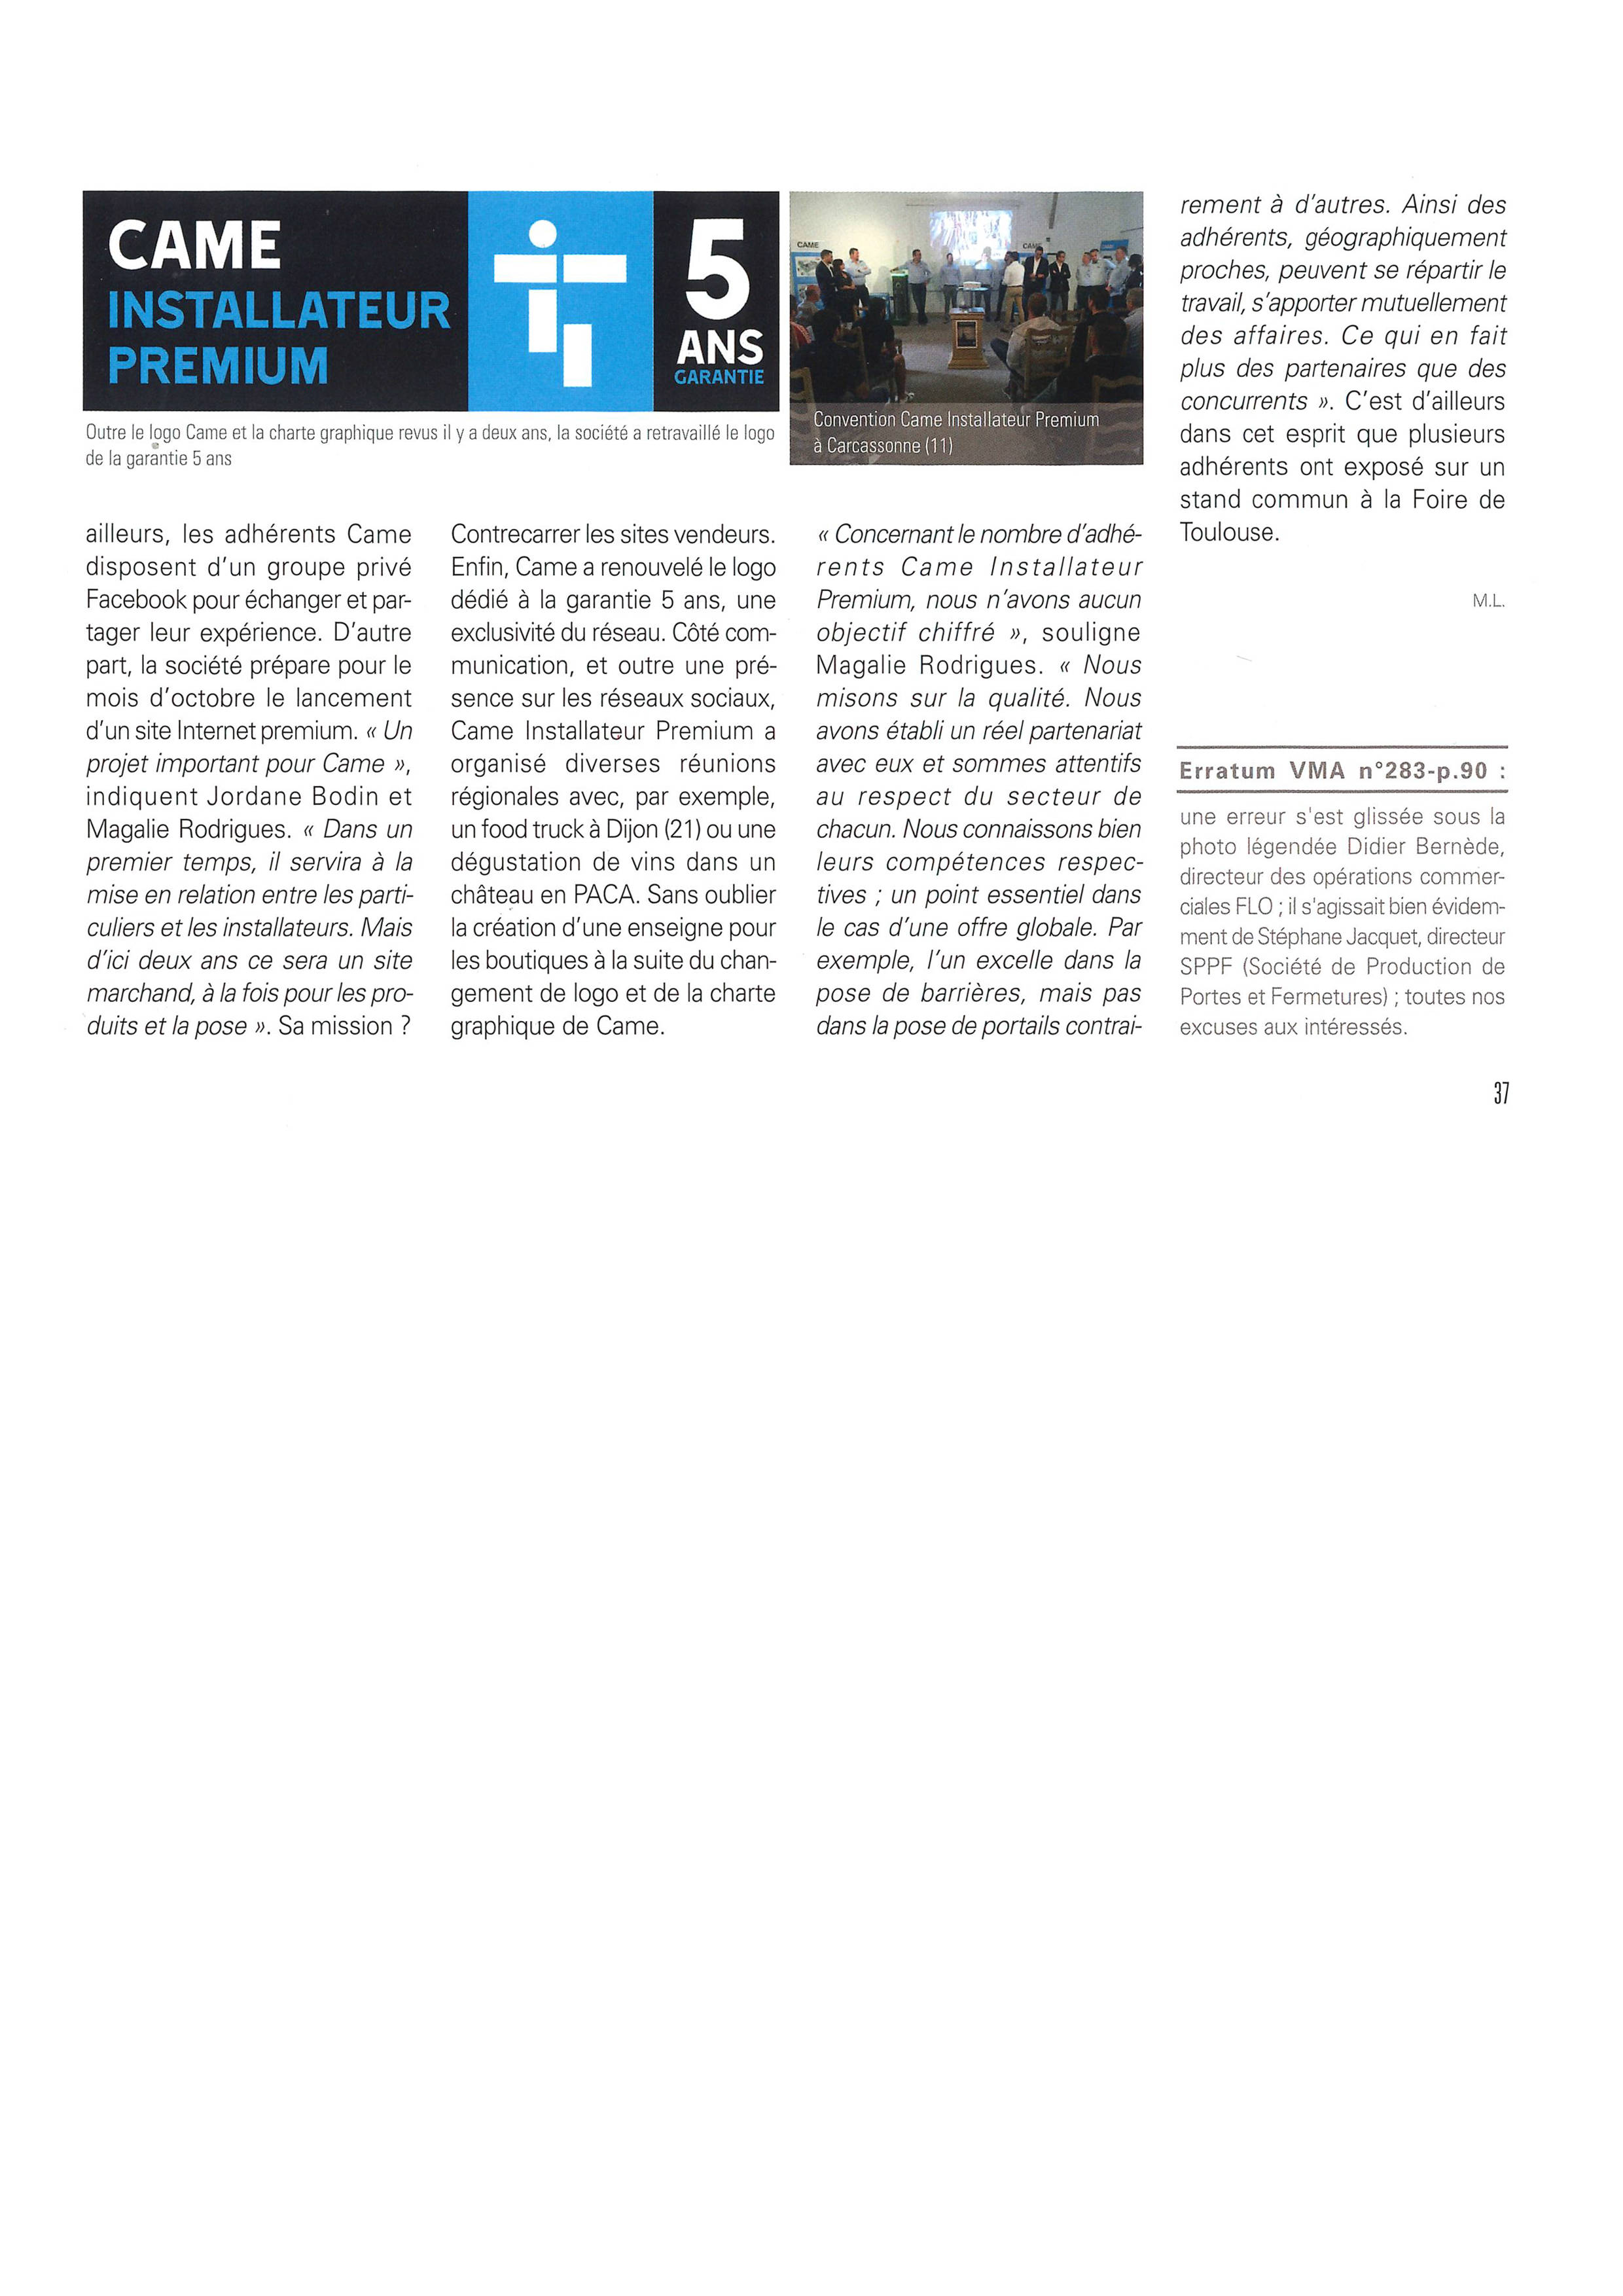 ARTICLE PRESSE 2 came dubard automatismes